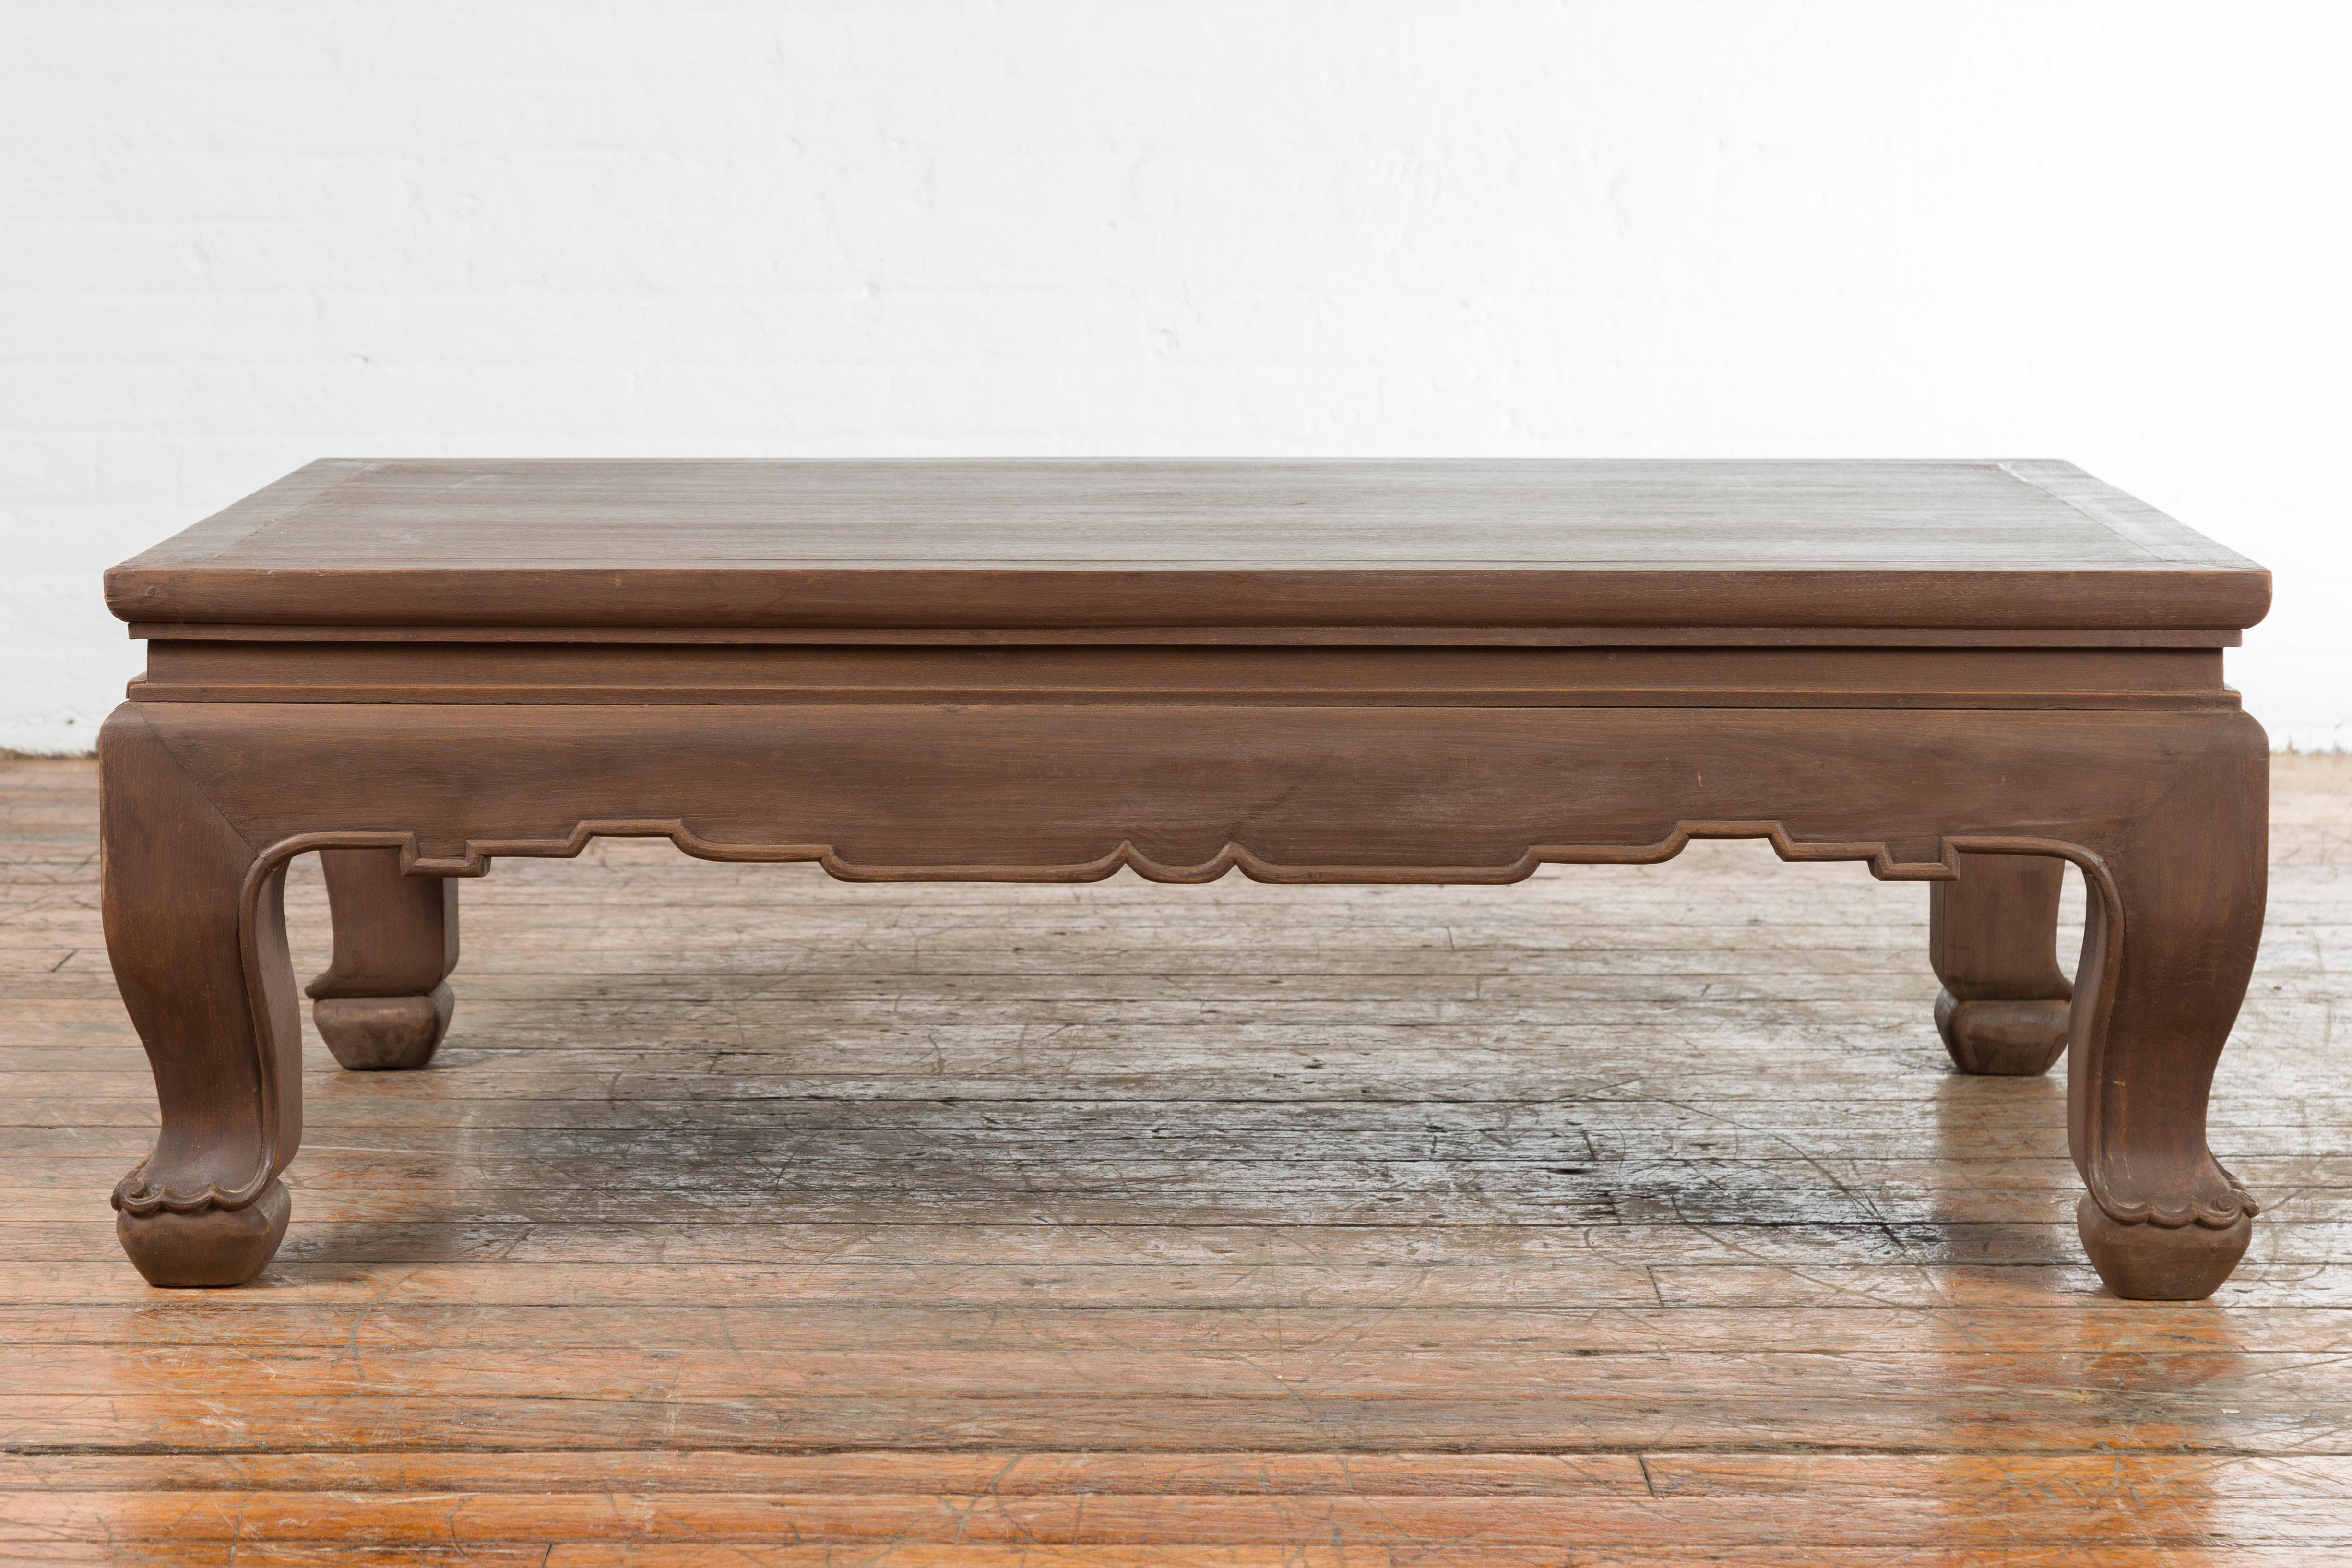 A vintage Thai chow legs coffee table from the mid 20th century, with carved apron and brown patina. Created in Thailand during the midcentury period, this coffee table features a rectangular waisted top sitting above a symmetrically carved apron.